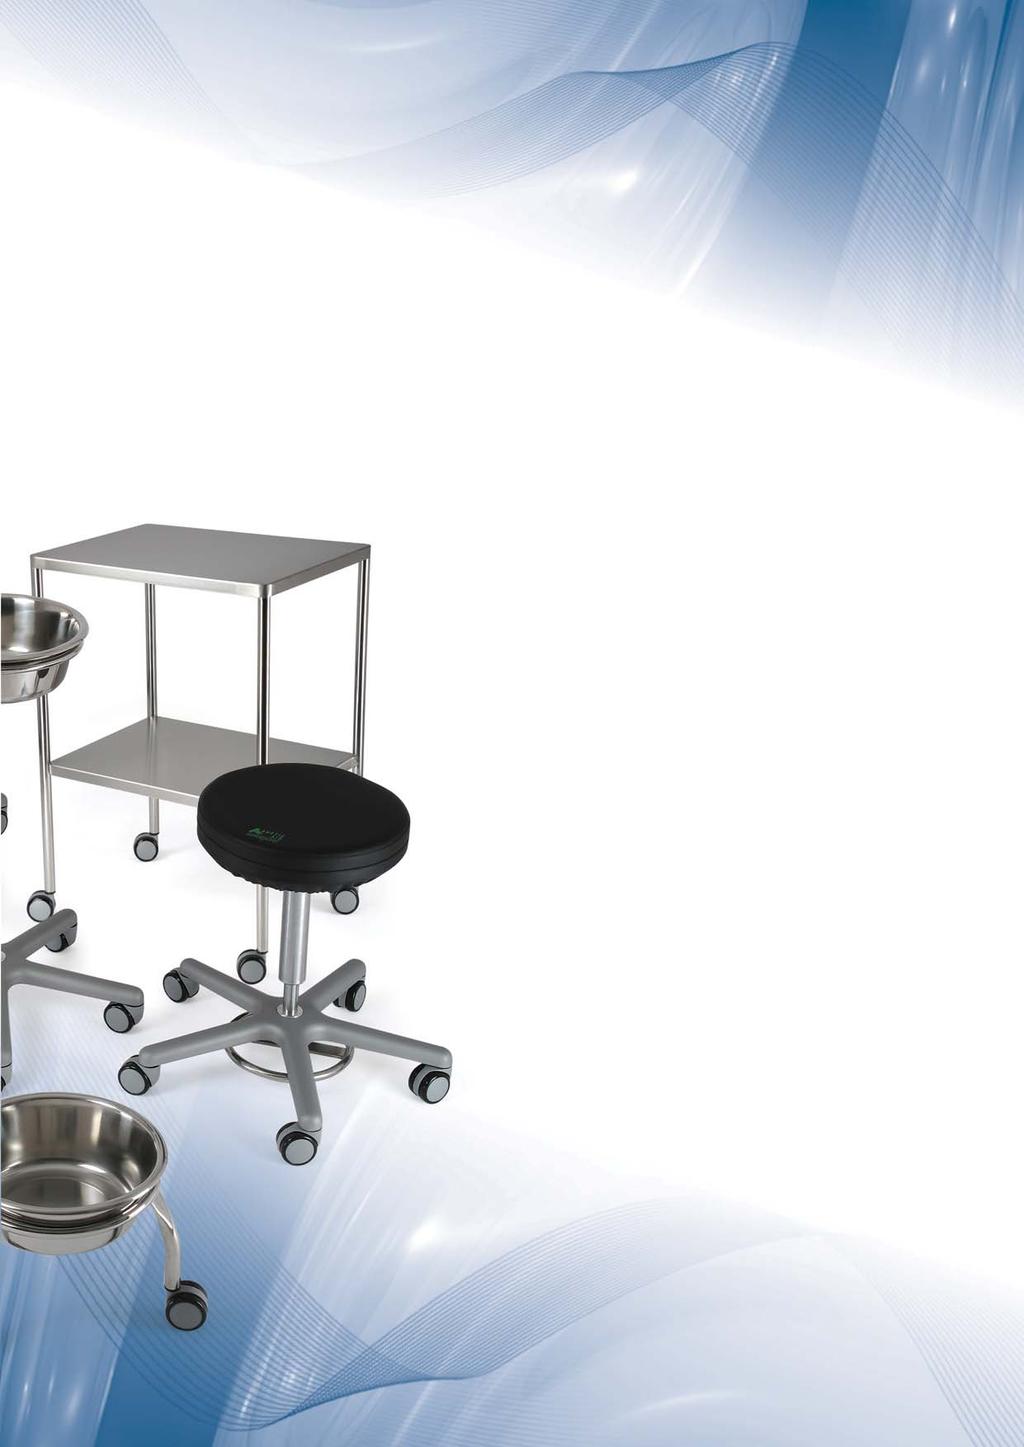 Stainless Steel Theatre Furniture Stainless Steel Theatre Furniture Introduction Guarantee Quality Assured Theatre equipment specialist Anetic Aid offers a high quality range of stainless steel